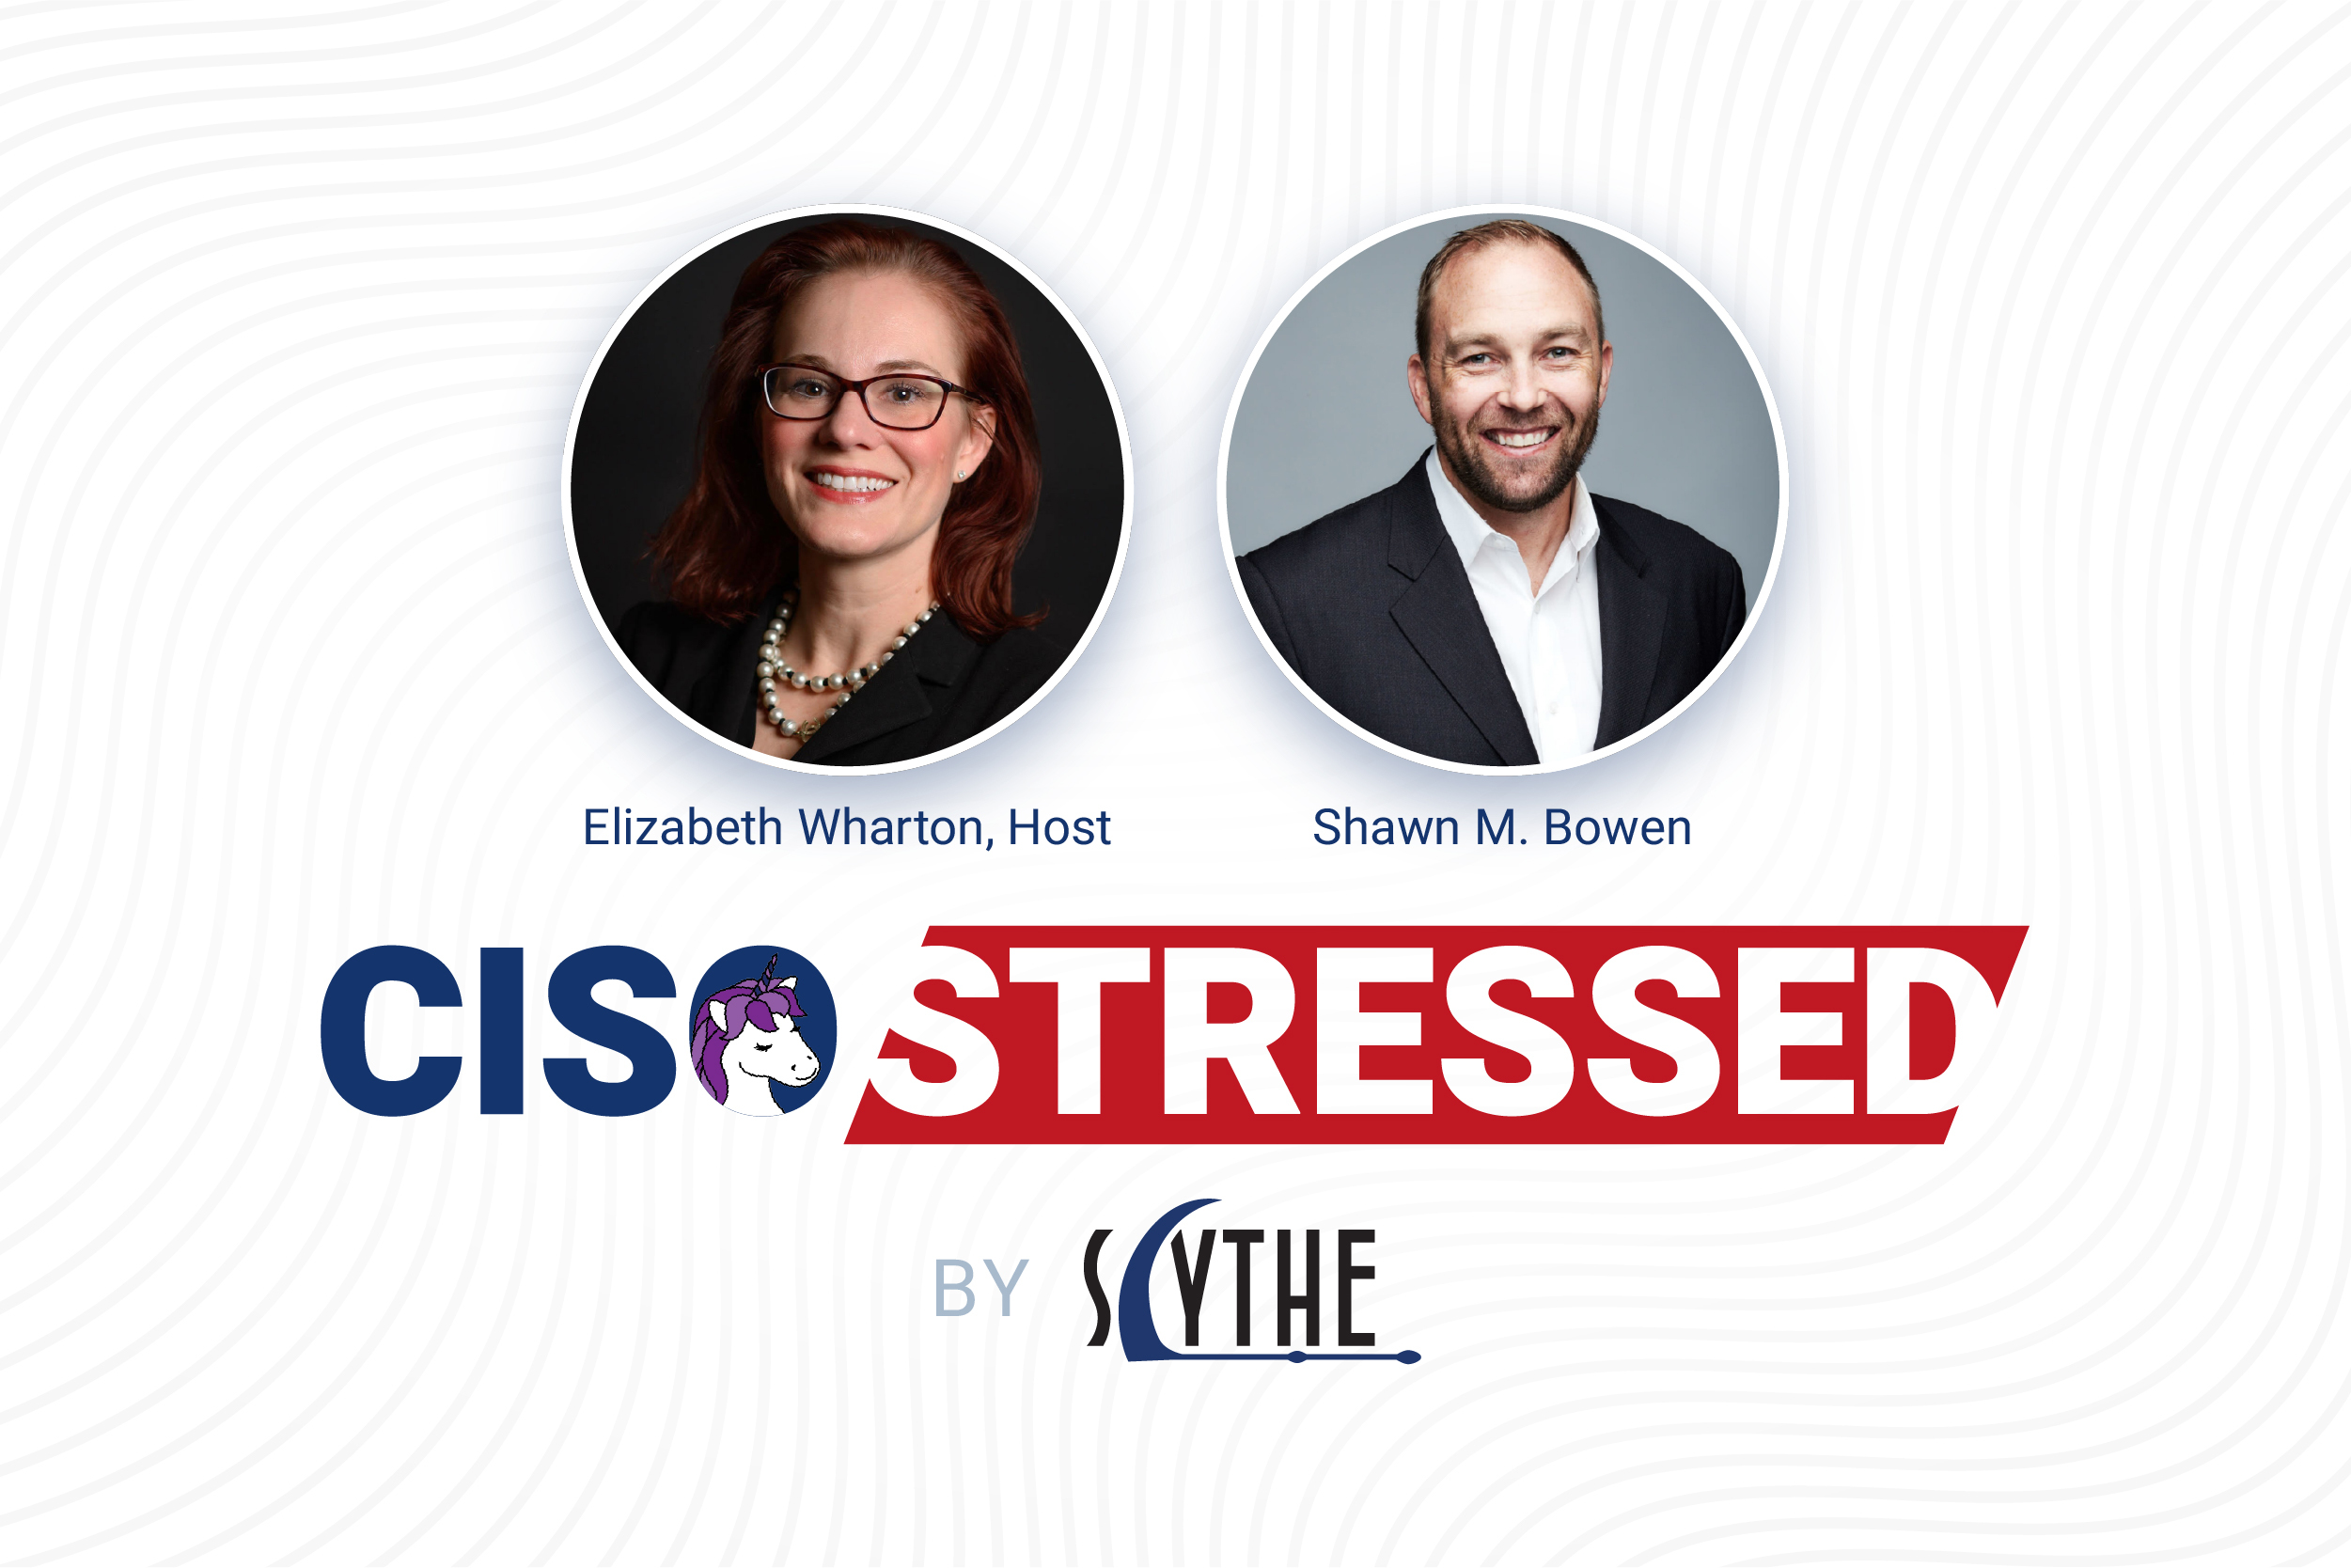 CISO Stressed Episode 2: Digital Empathy in the Customer Experience (Guest Shawn M Bowen)